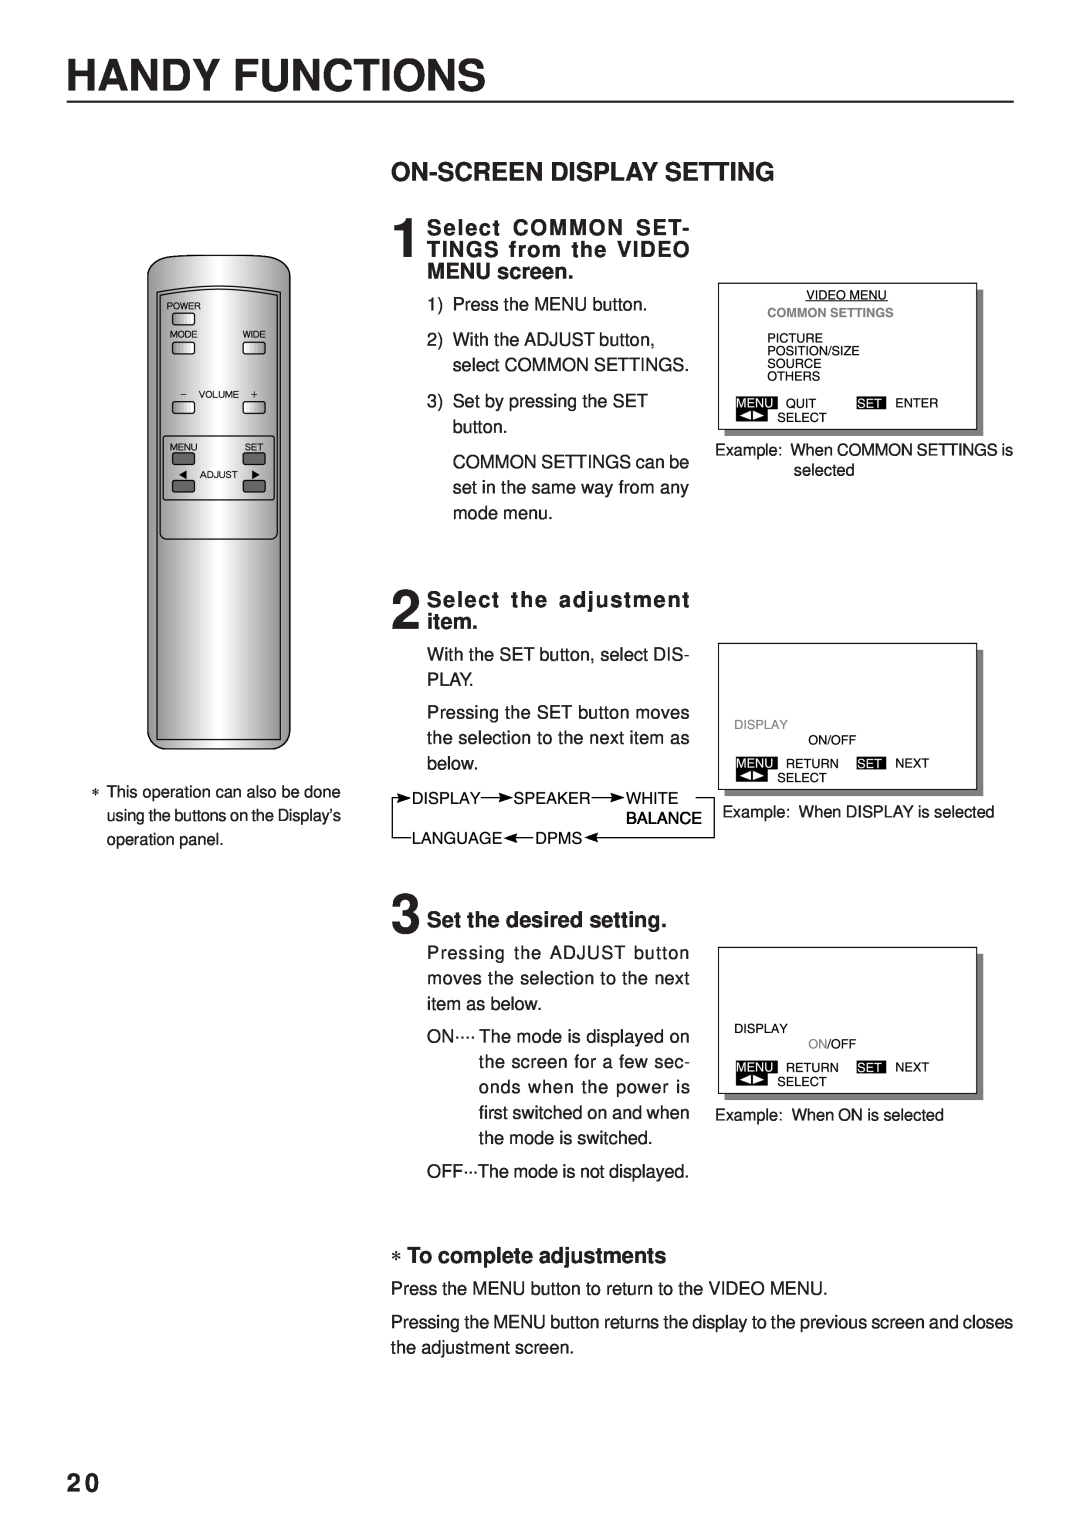 Fujitsu PDS4203W-H / PDS4203E-H user manual Handy Functions, On-Screen Display Setting, Select the adjustment item 